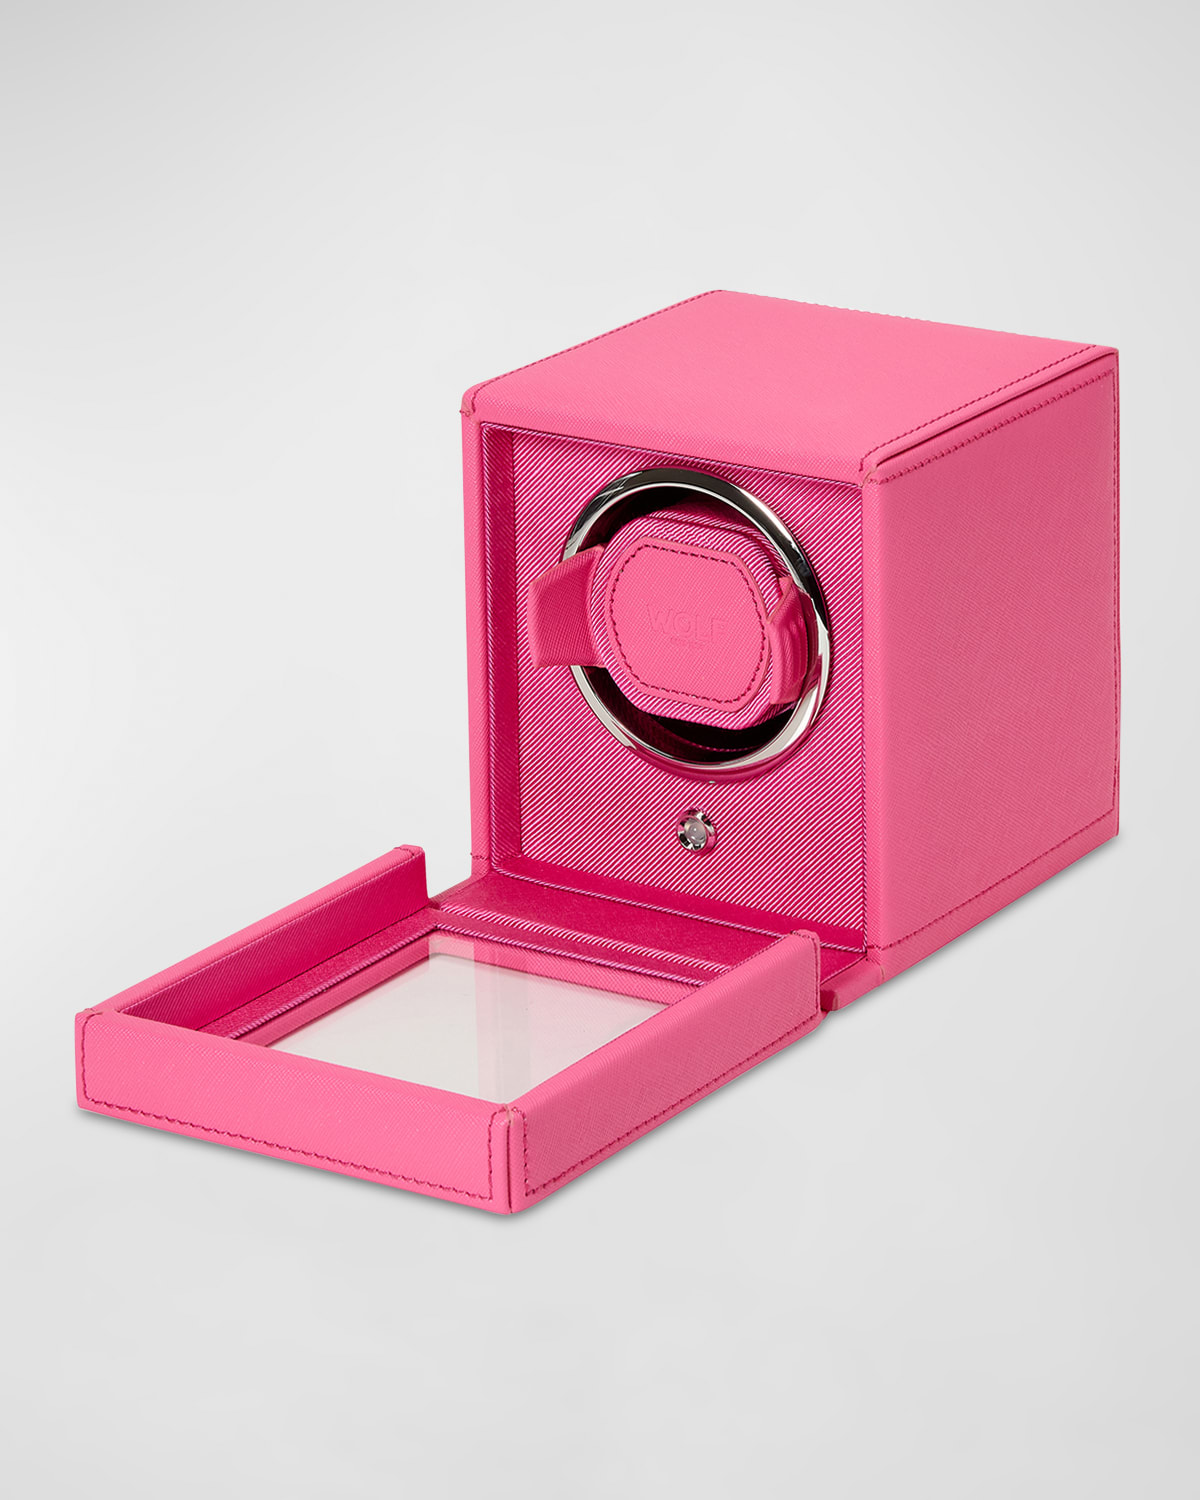 Wolf Cub Single Watch Winder With Cover In Pink